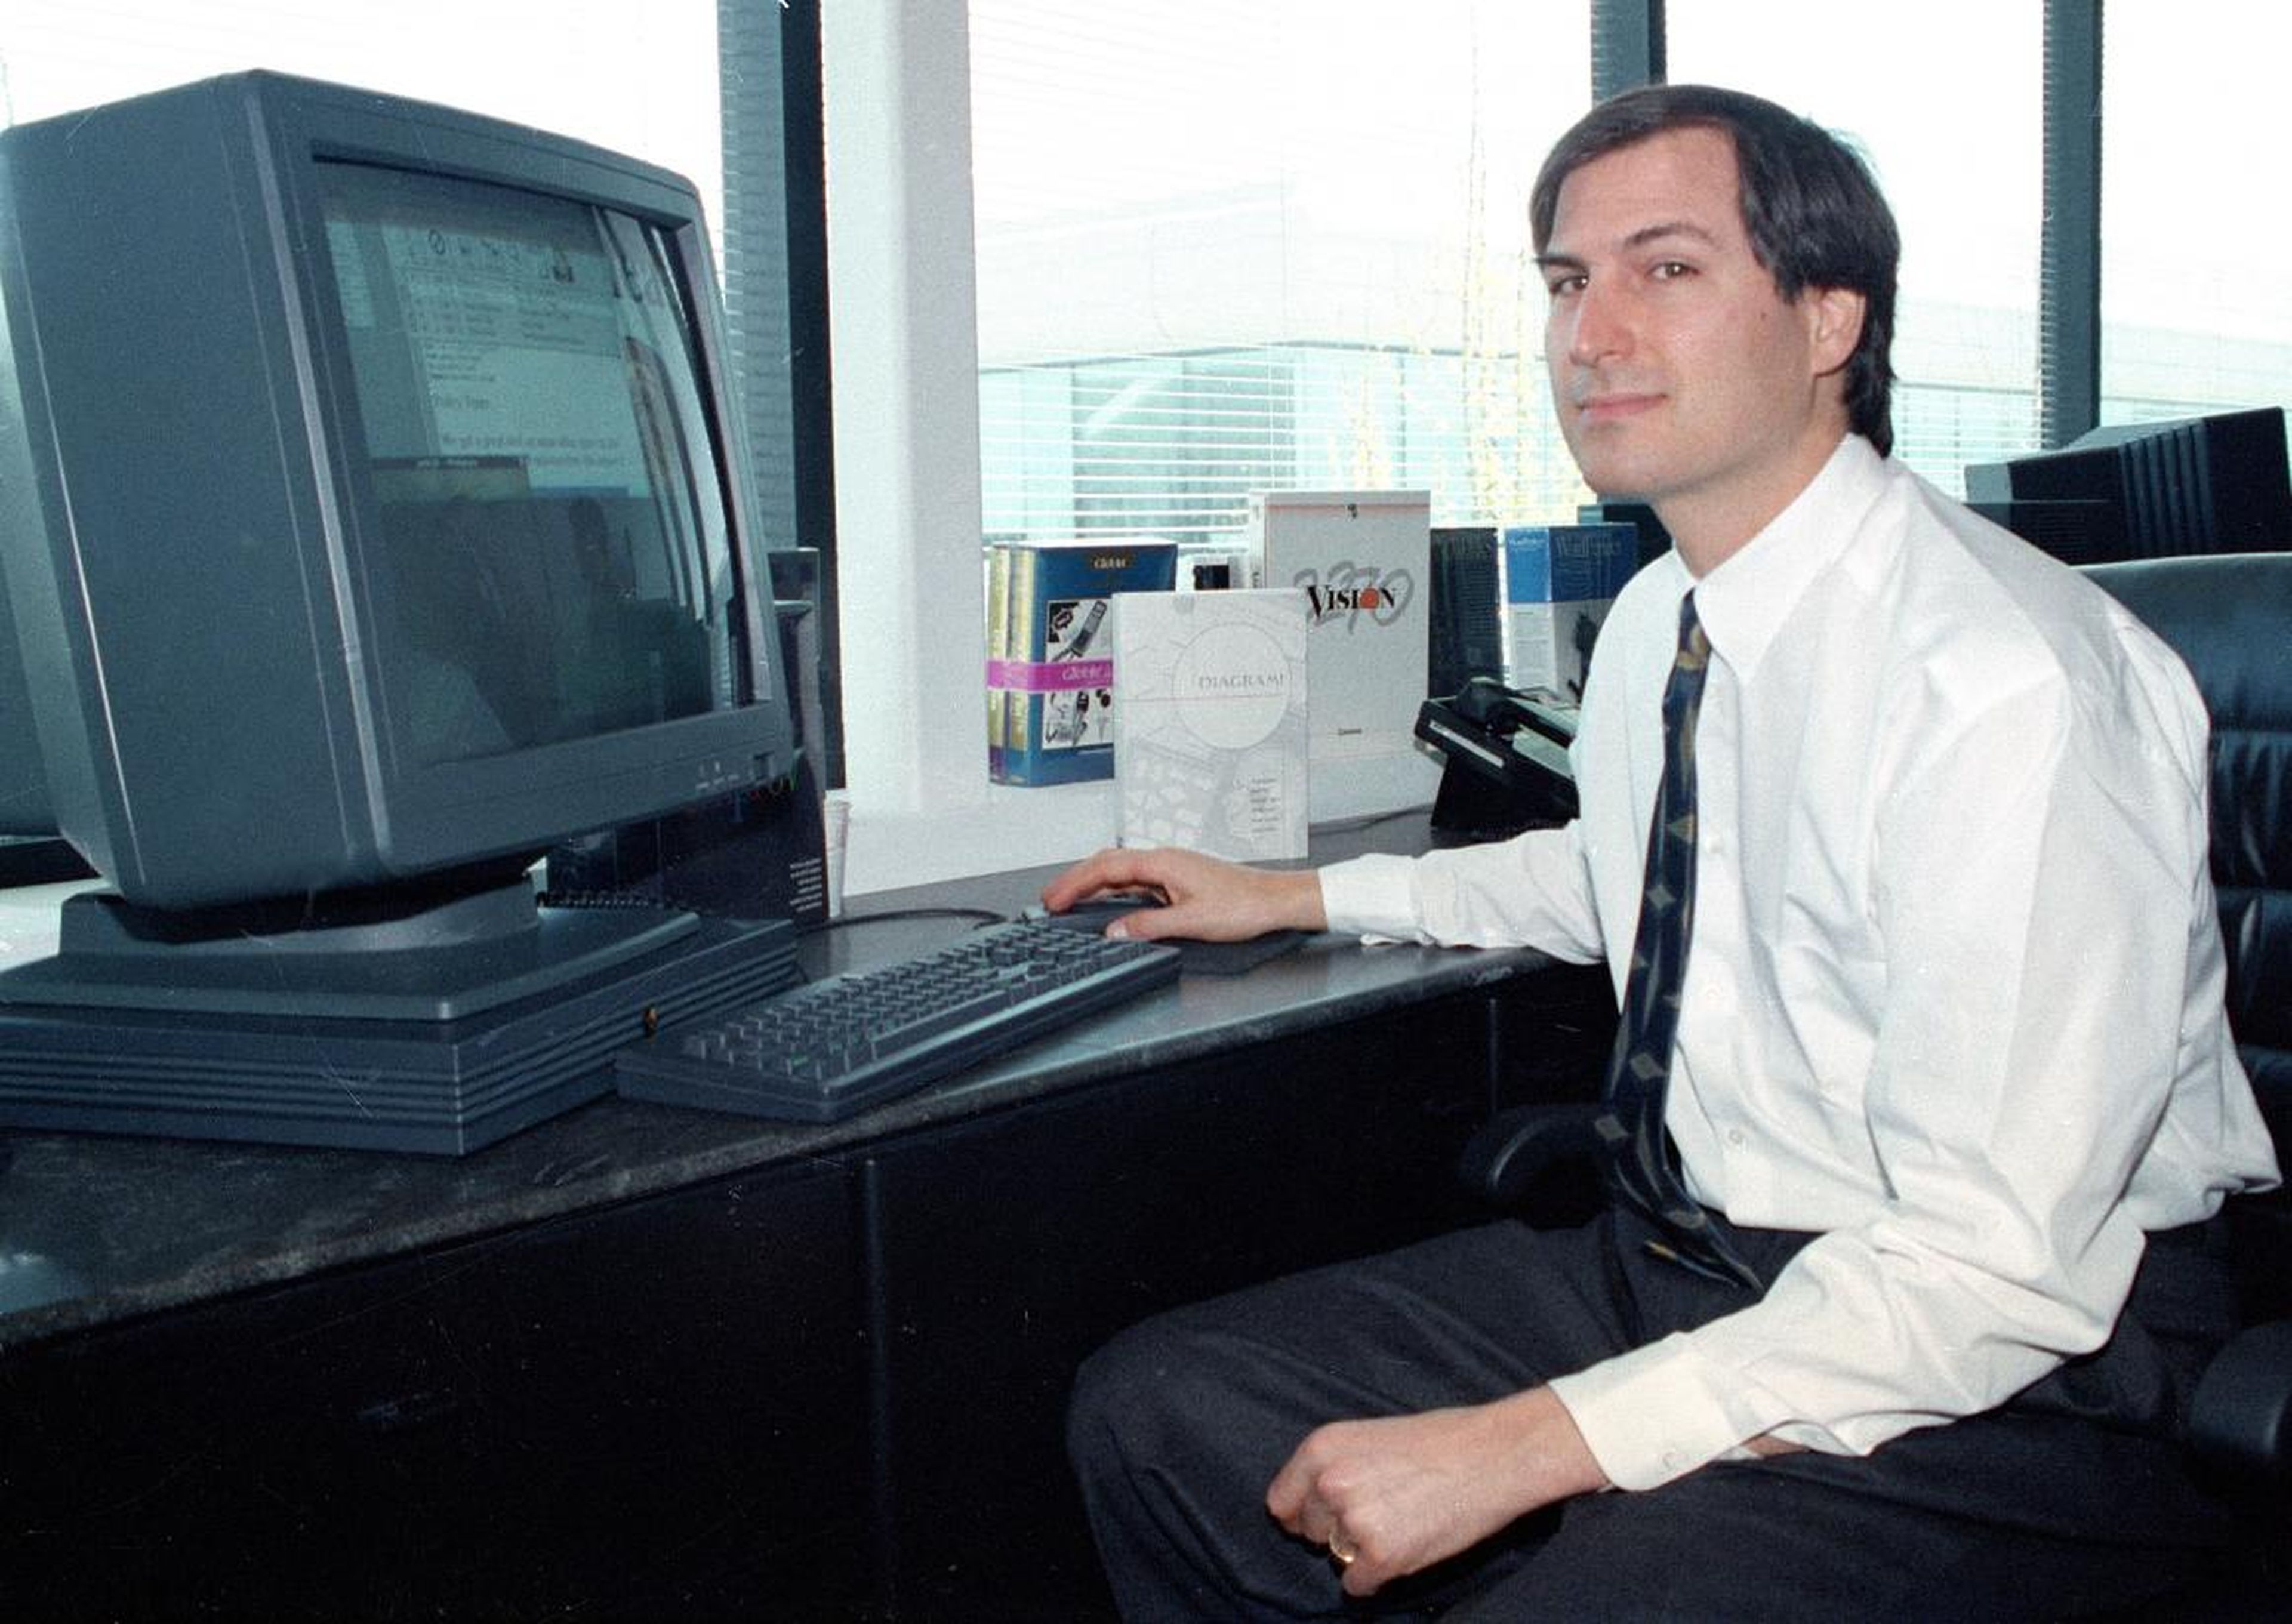 In this April 4, 1991, photo, Steve Jobs of NeXT Computer Inc. poses for the press with his NeXTstation color computer at the NeXT facility in Redwood City.